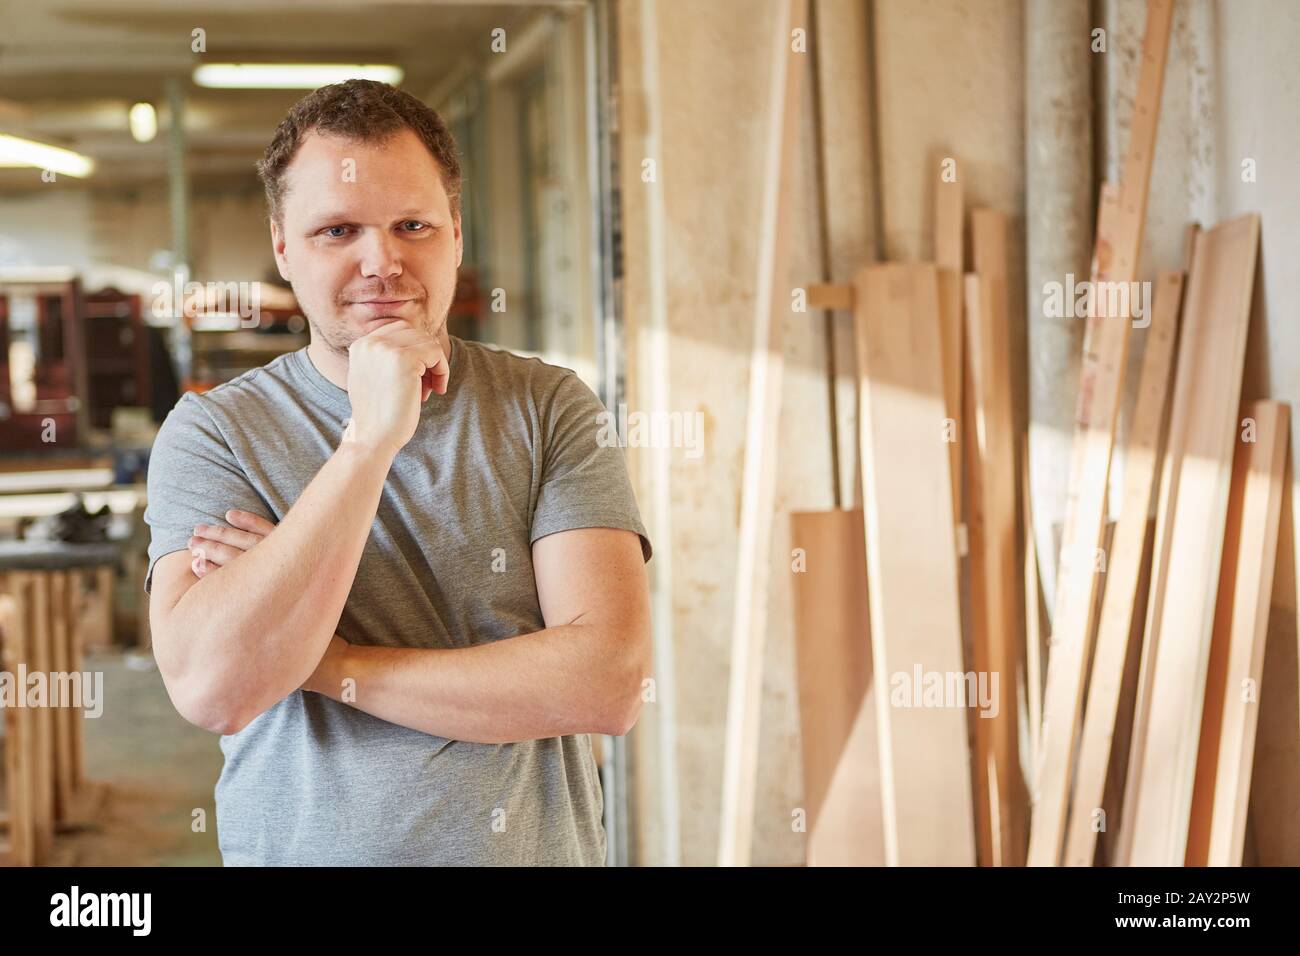 Thoughtful man as a craftsman or carpenter apprentice in a joinery Stock Photo